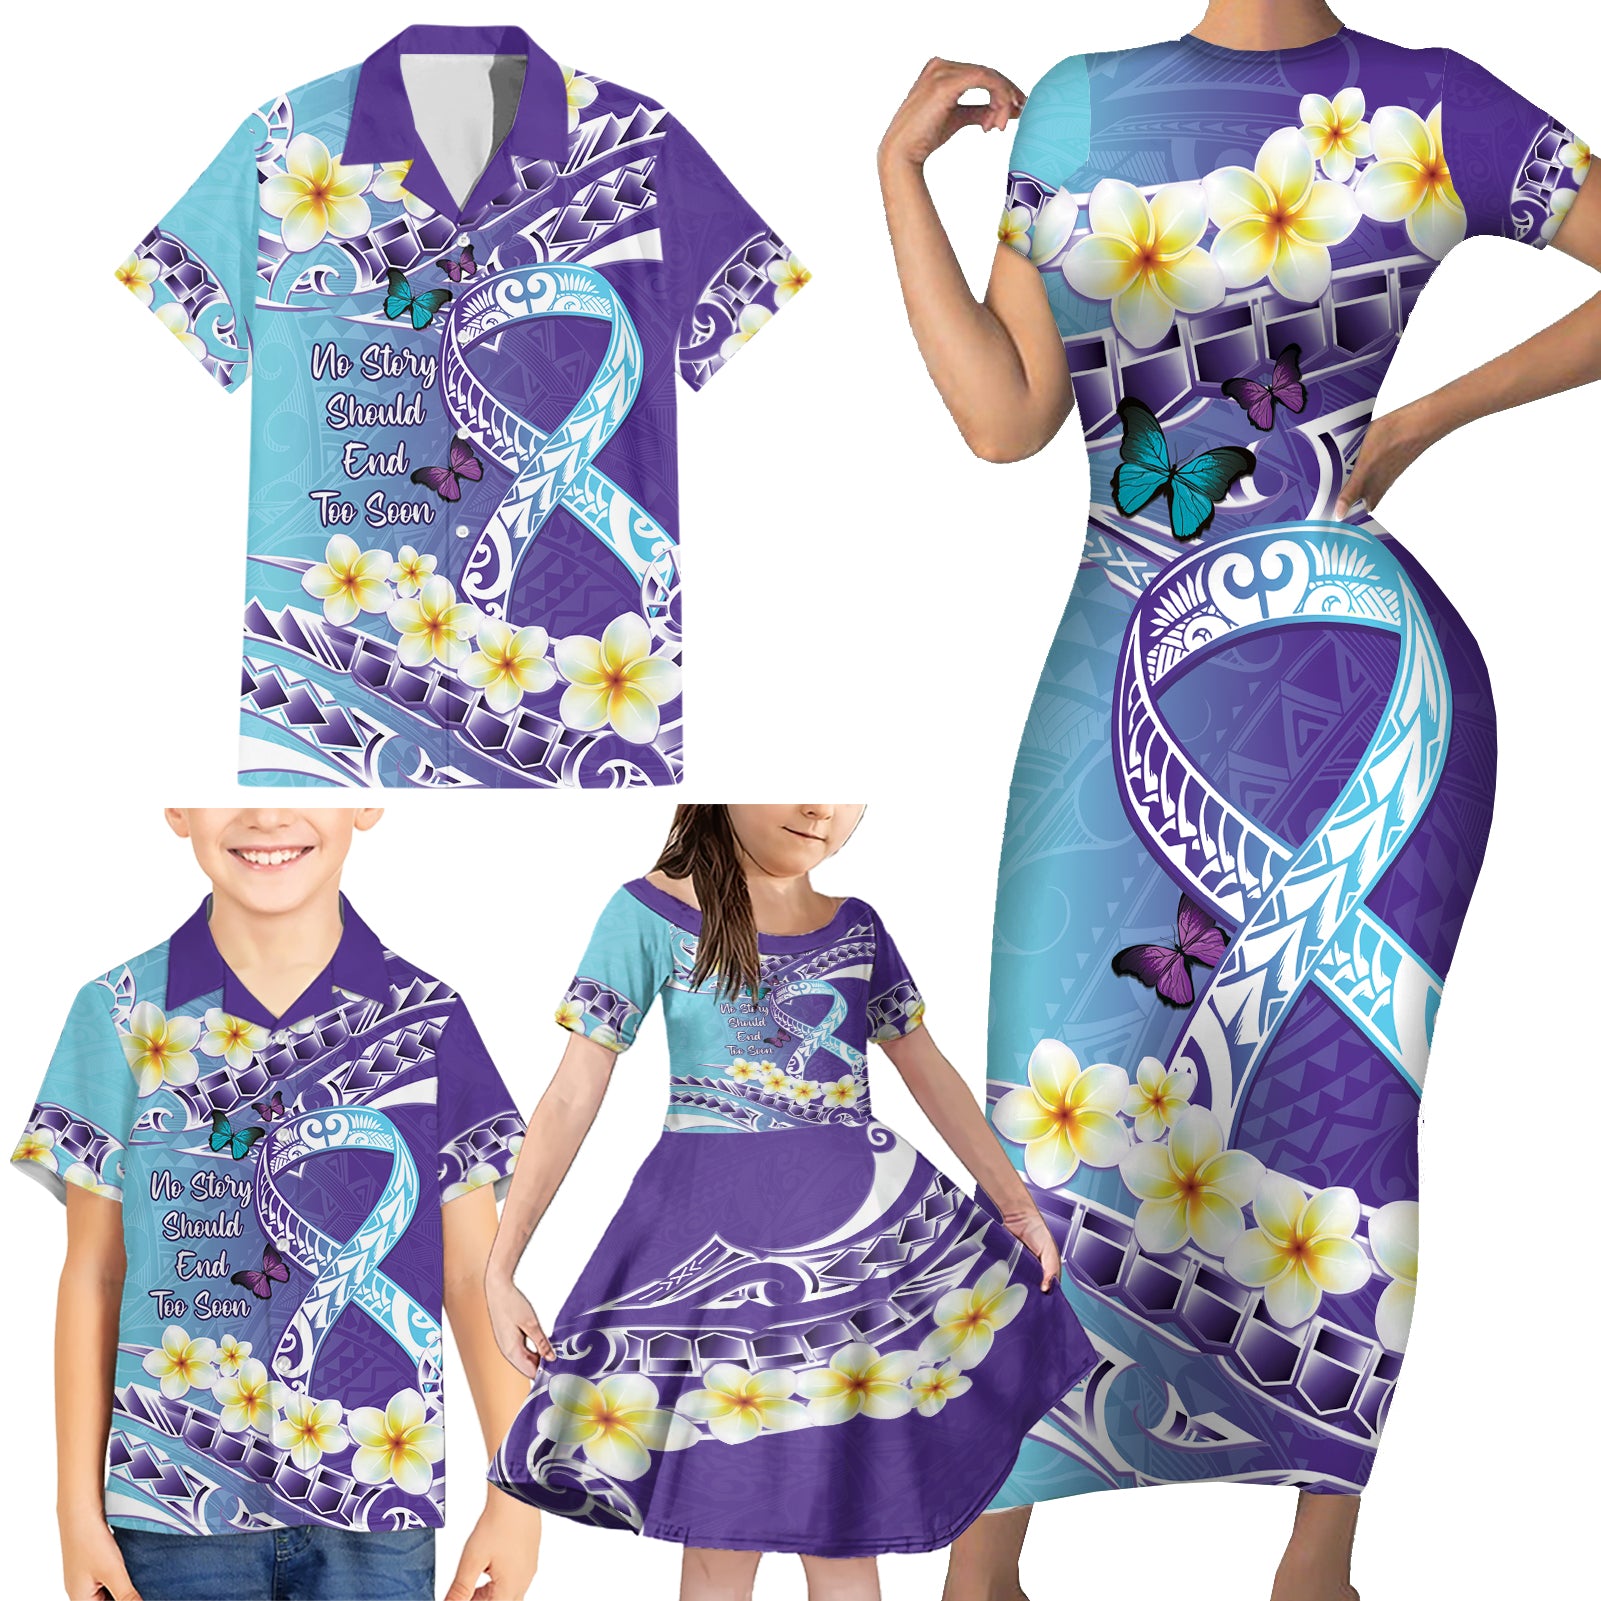 No Story Should End Too Soon Suicide Awareness Family Matching Short Sleeve Bodycon Dress and Hawaiian Shirt Purple And Teal Polynesian Ribbon